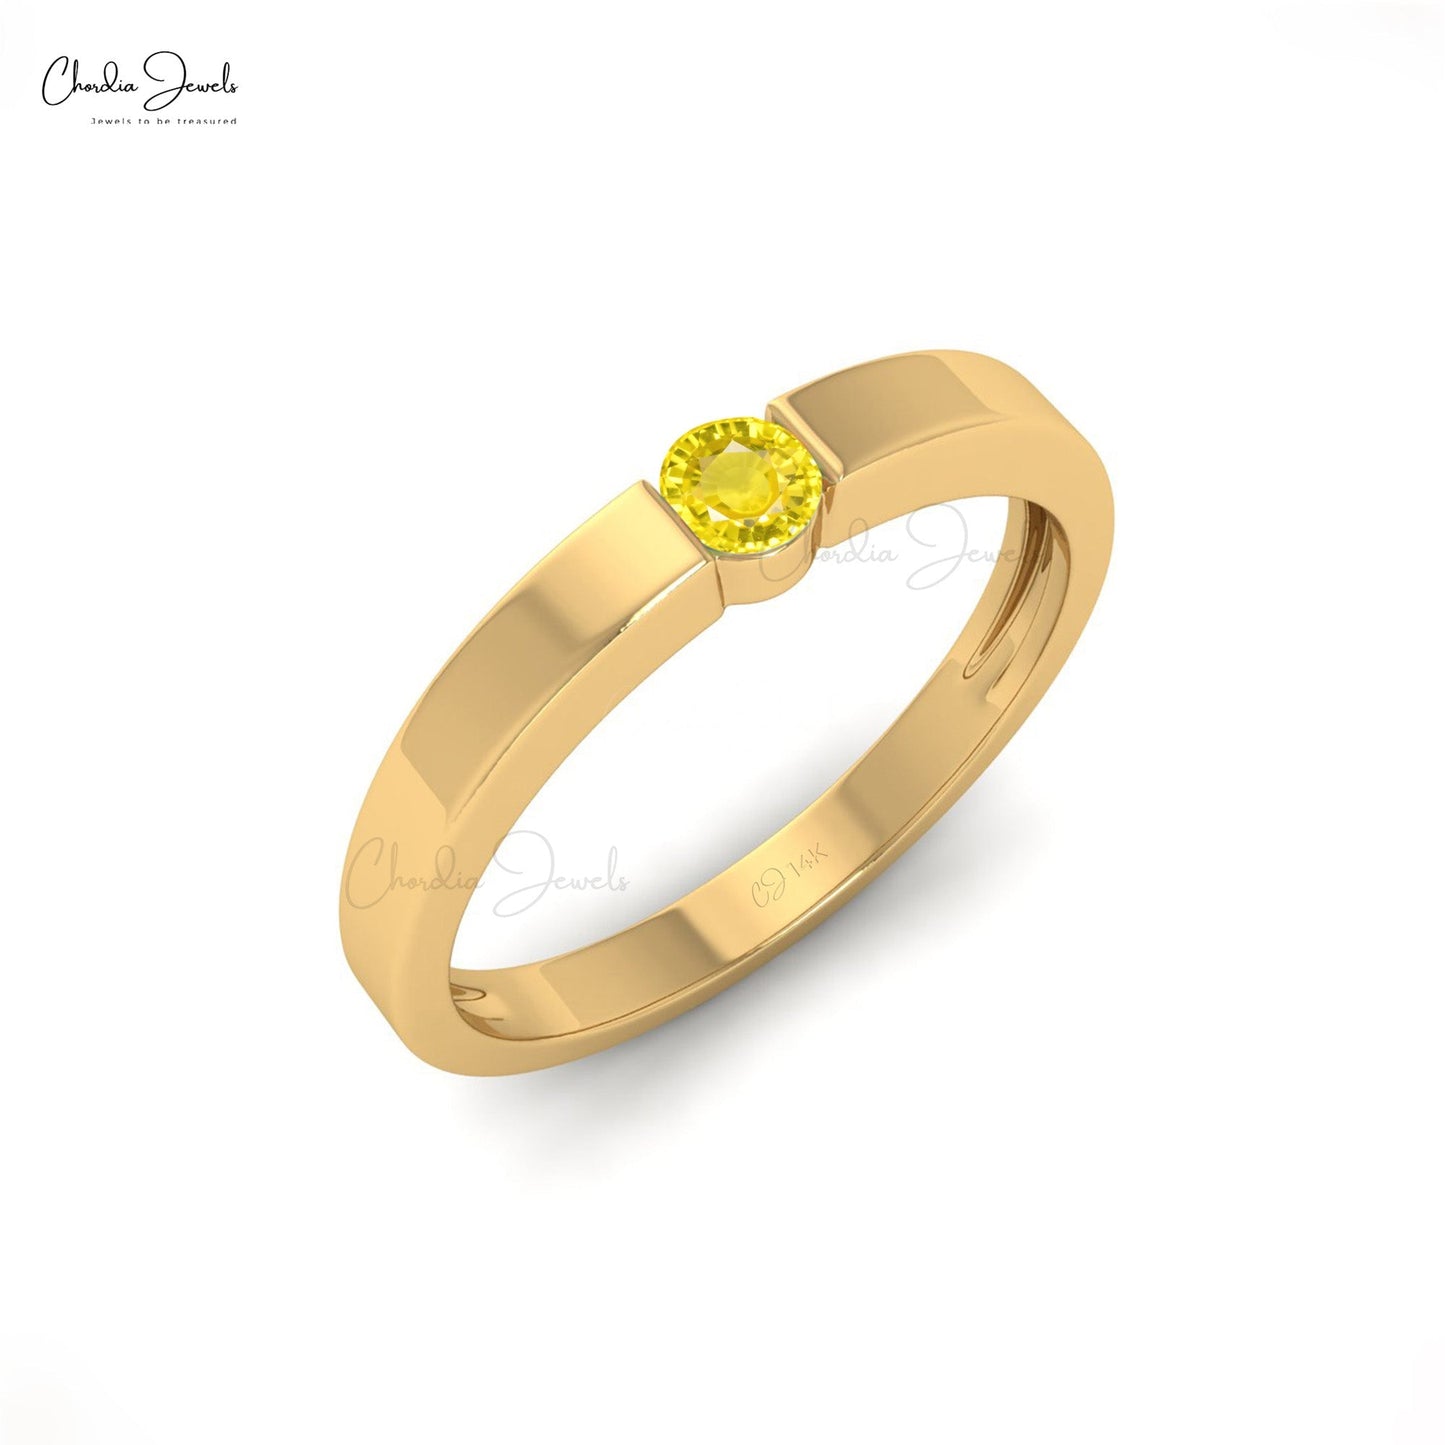 Load image into Gallery viewer, Round Cut Yellow Sapphire Solitaire Ring in 14K Gold
